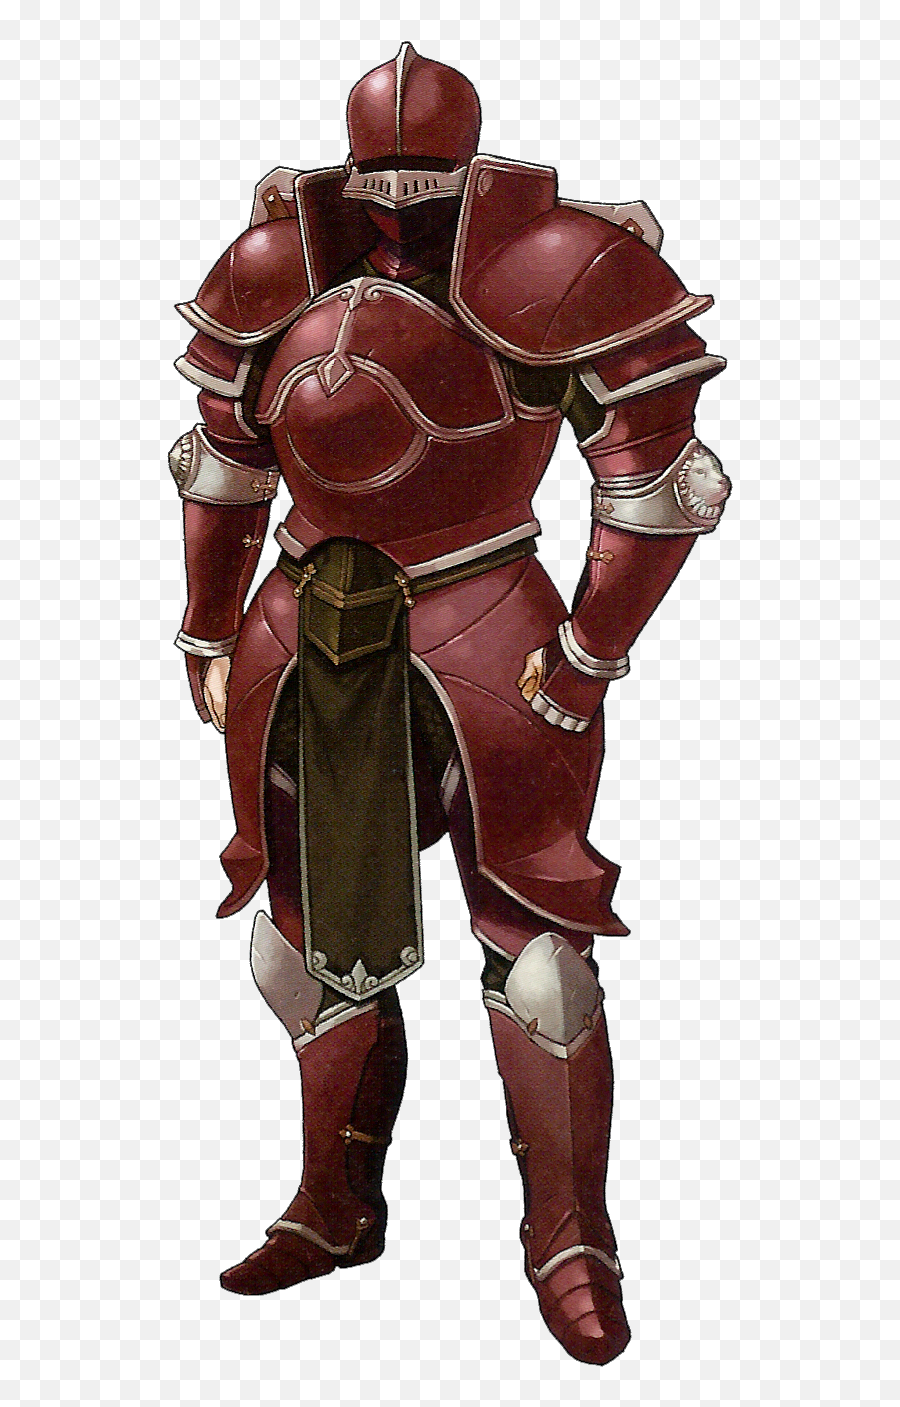 Fire Emblem Great Knight Png Image - Fire Emblem Echoes Knight,Red Knight Png